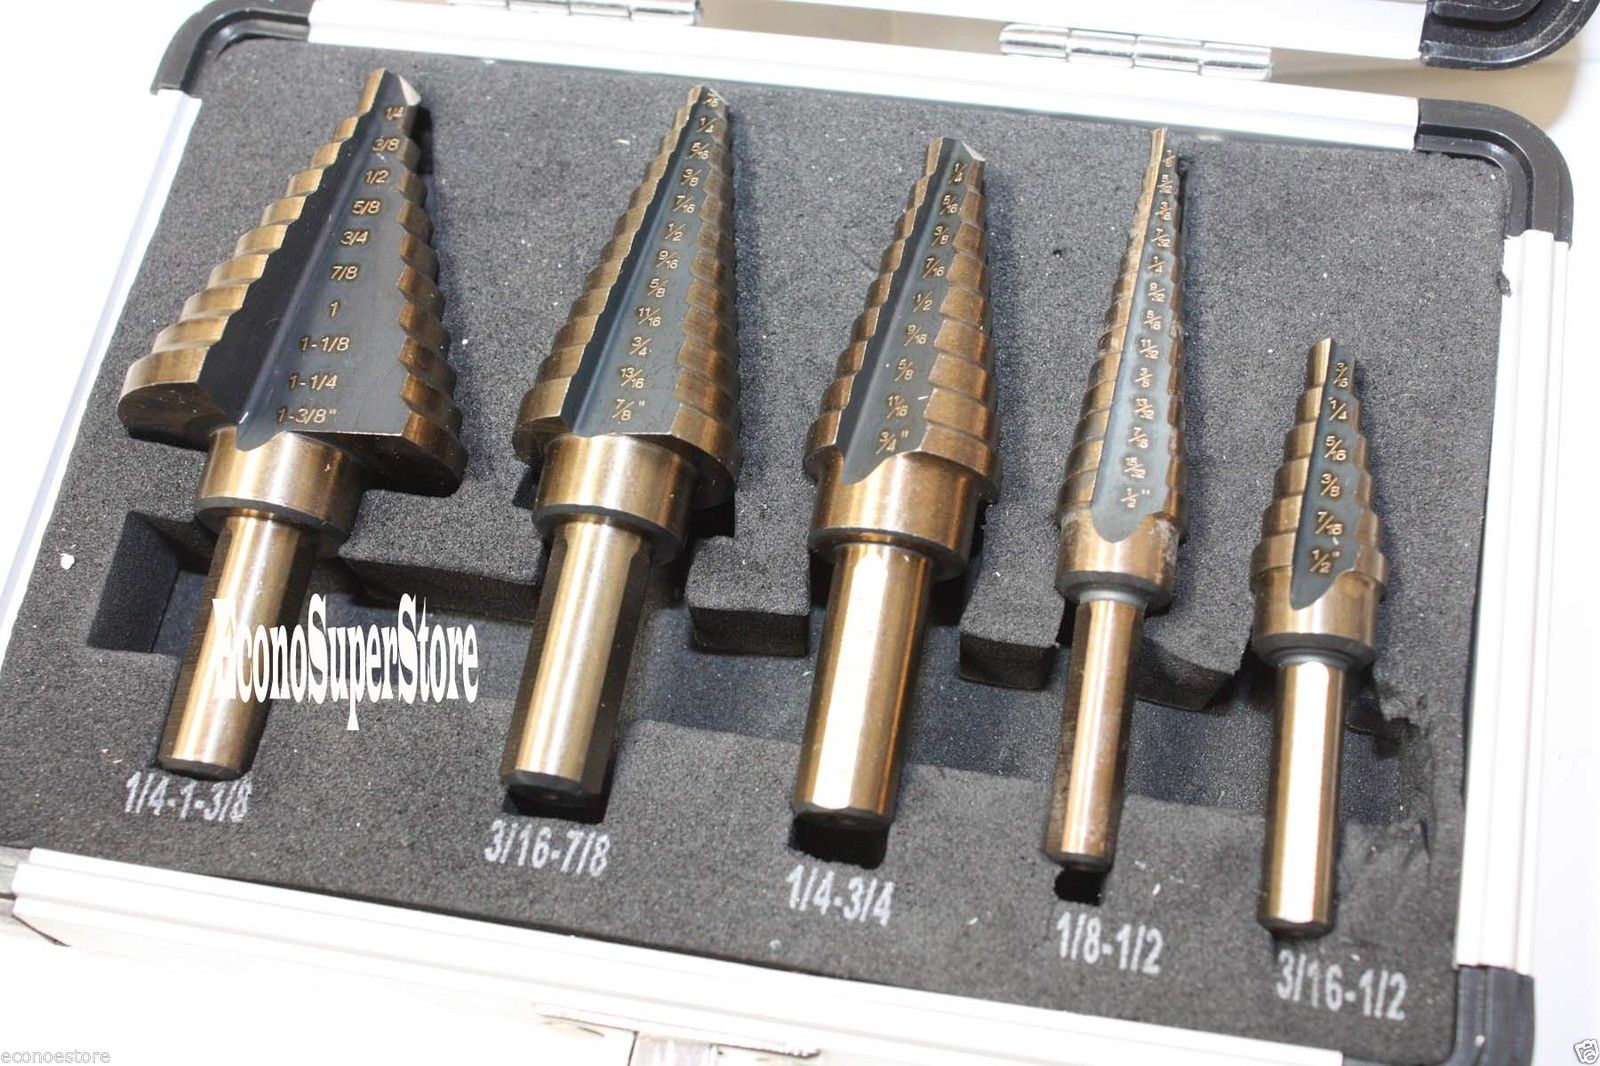 Dtacke 5Pcs M35 Cobalt Coated Spiral Grooved Drill Bit Industrial Step Drill Bits Hex Shank Drilling Hole Drill Bit for Wood Stainless Steel Cutting